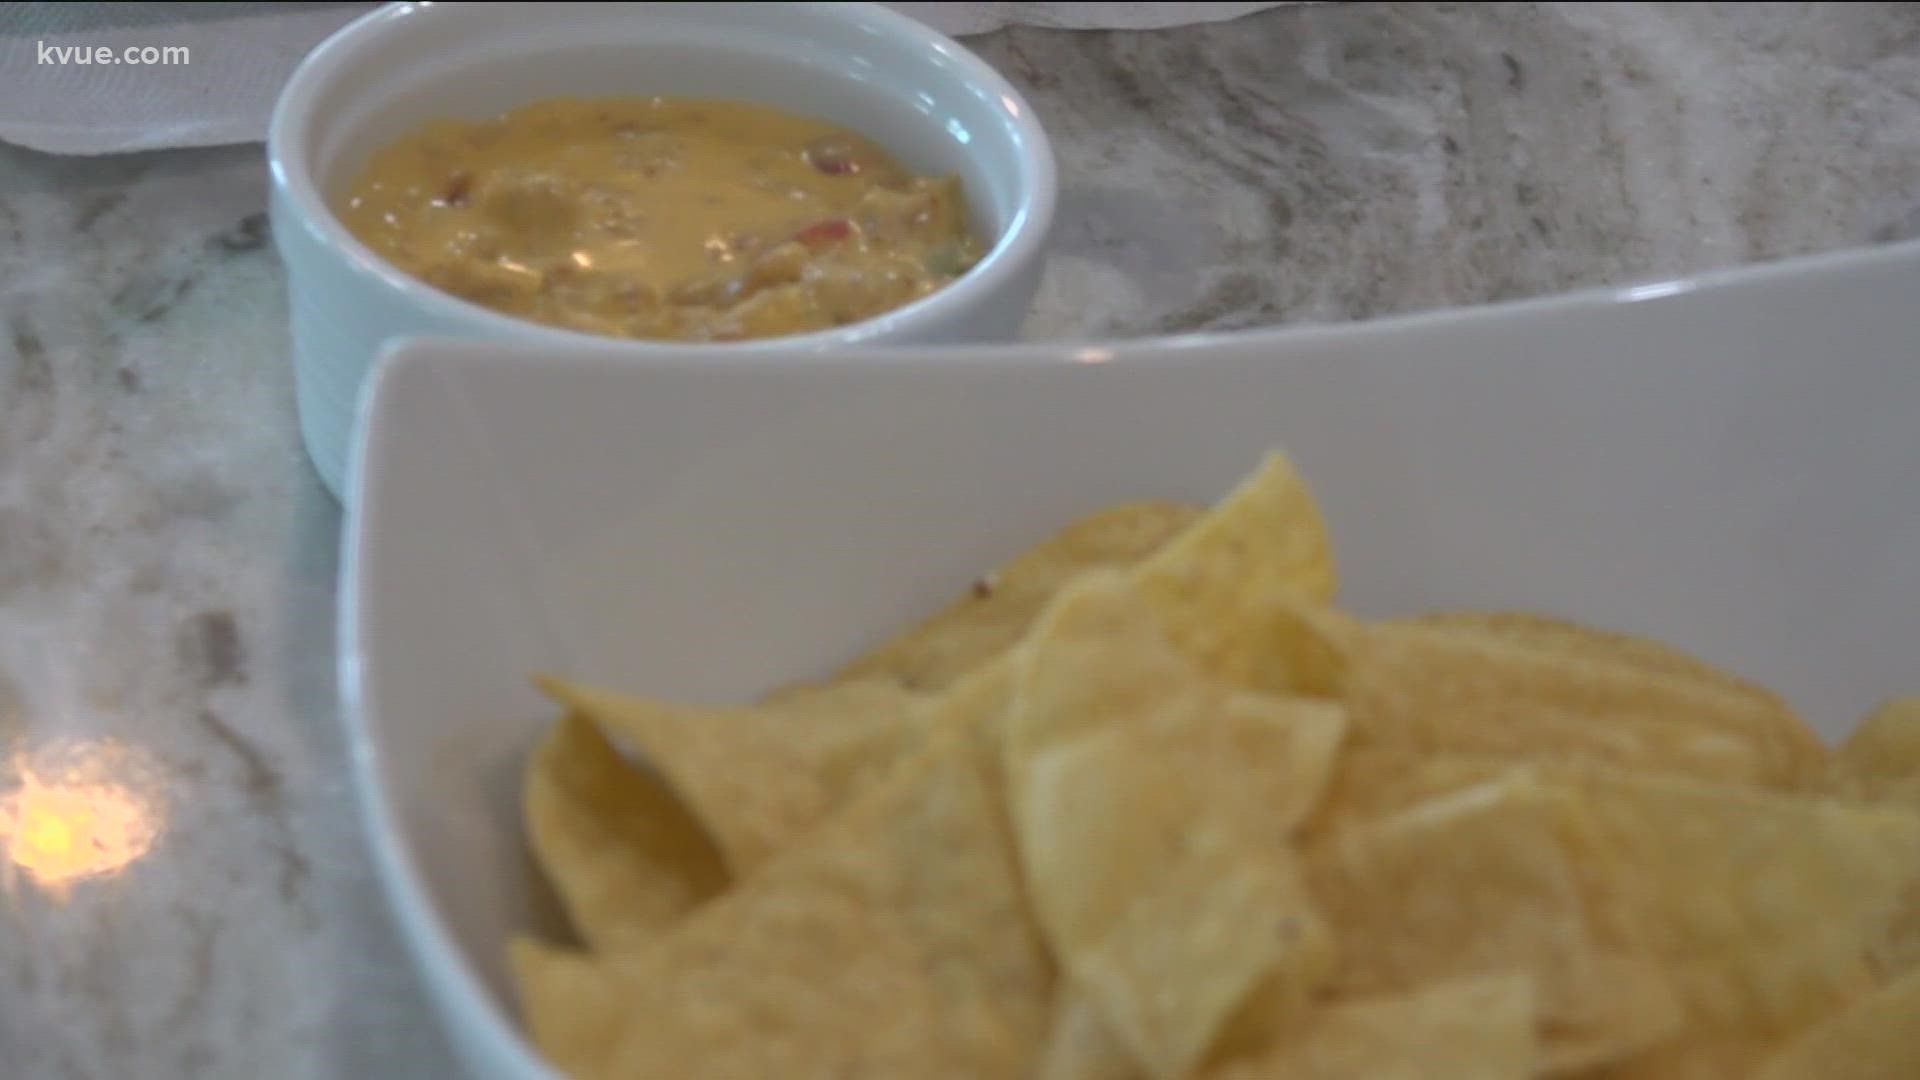 On this edition of Game Day Grilling, we're making queso. It all comes down to one special ingredient.